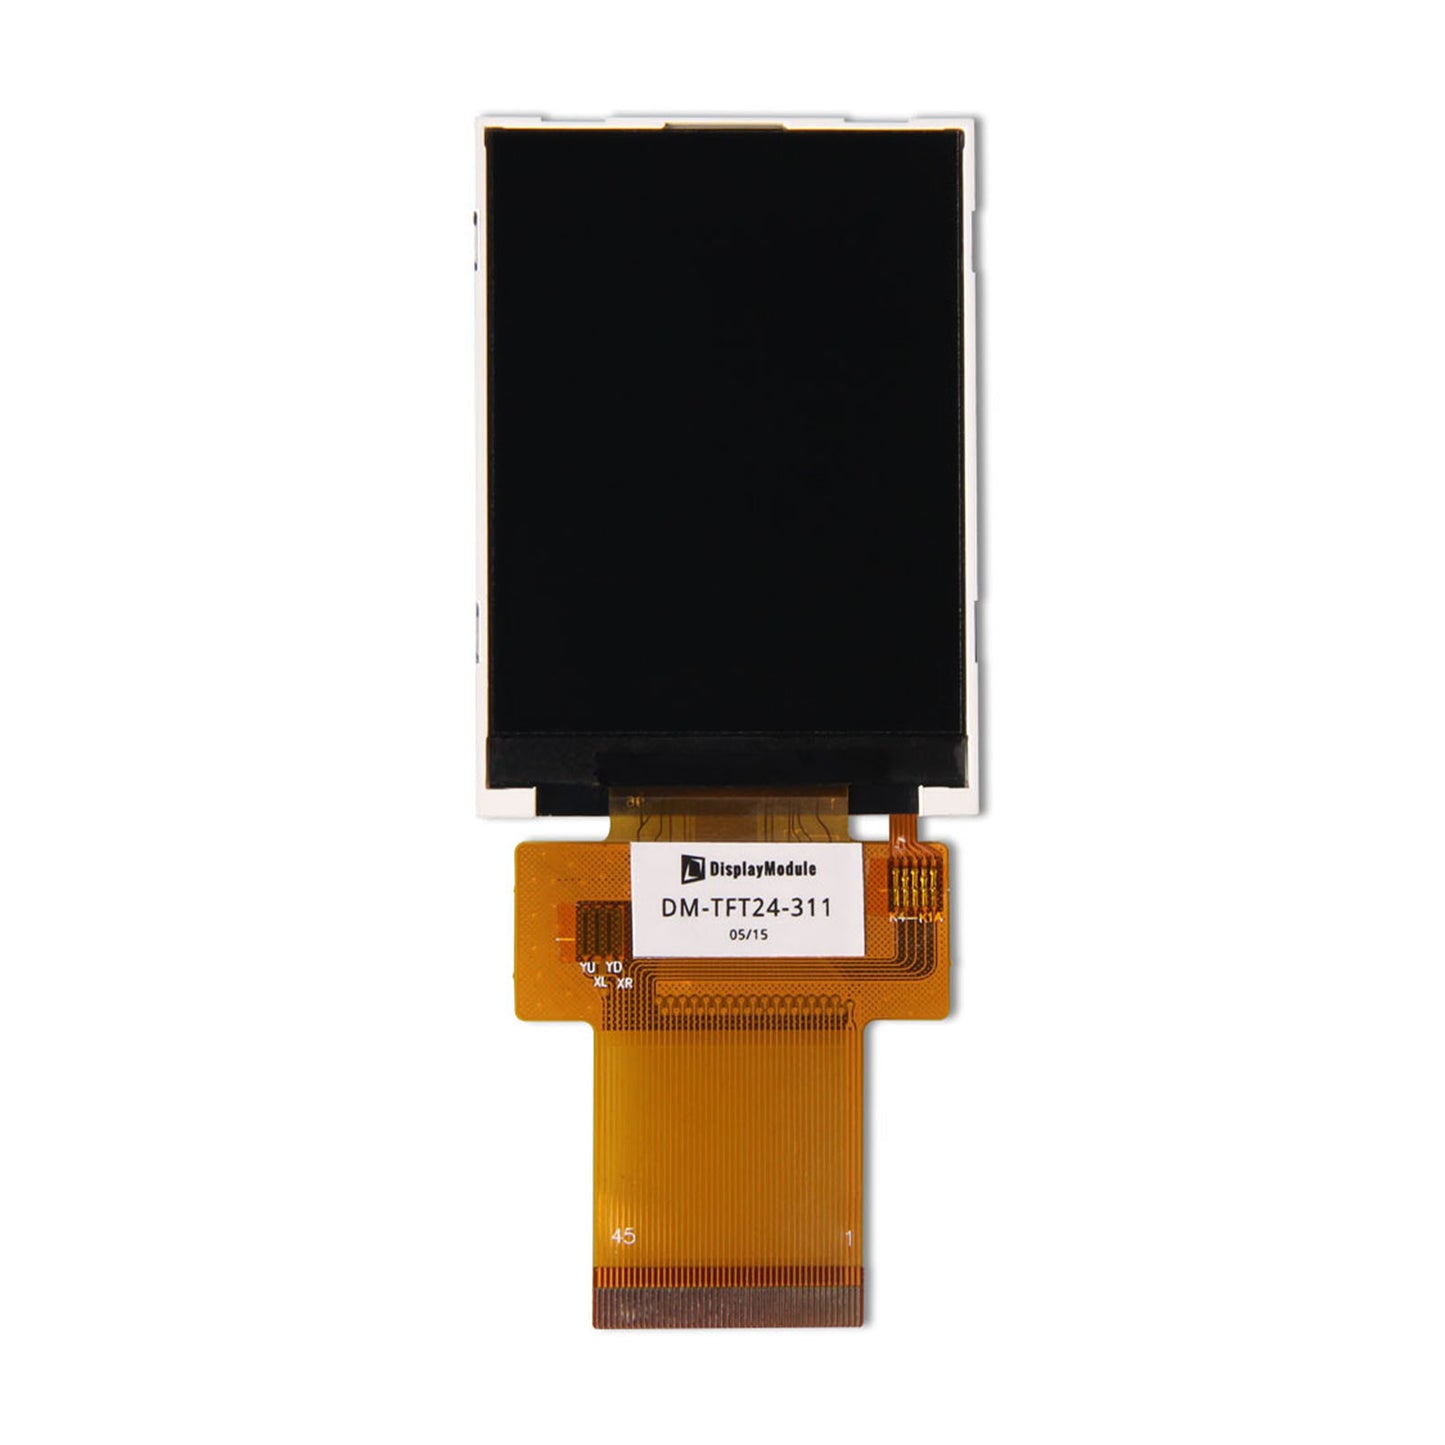 2.4 inch TFT Display Panel with 240x320 resolution, utilizing SPI, MCU, and RGB interfaces